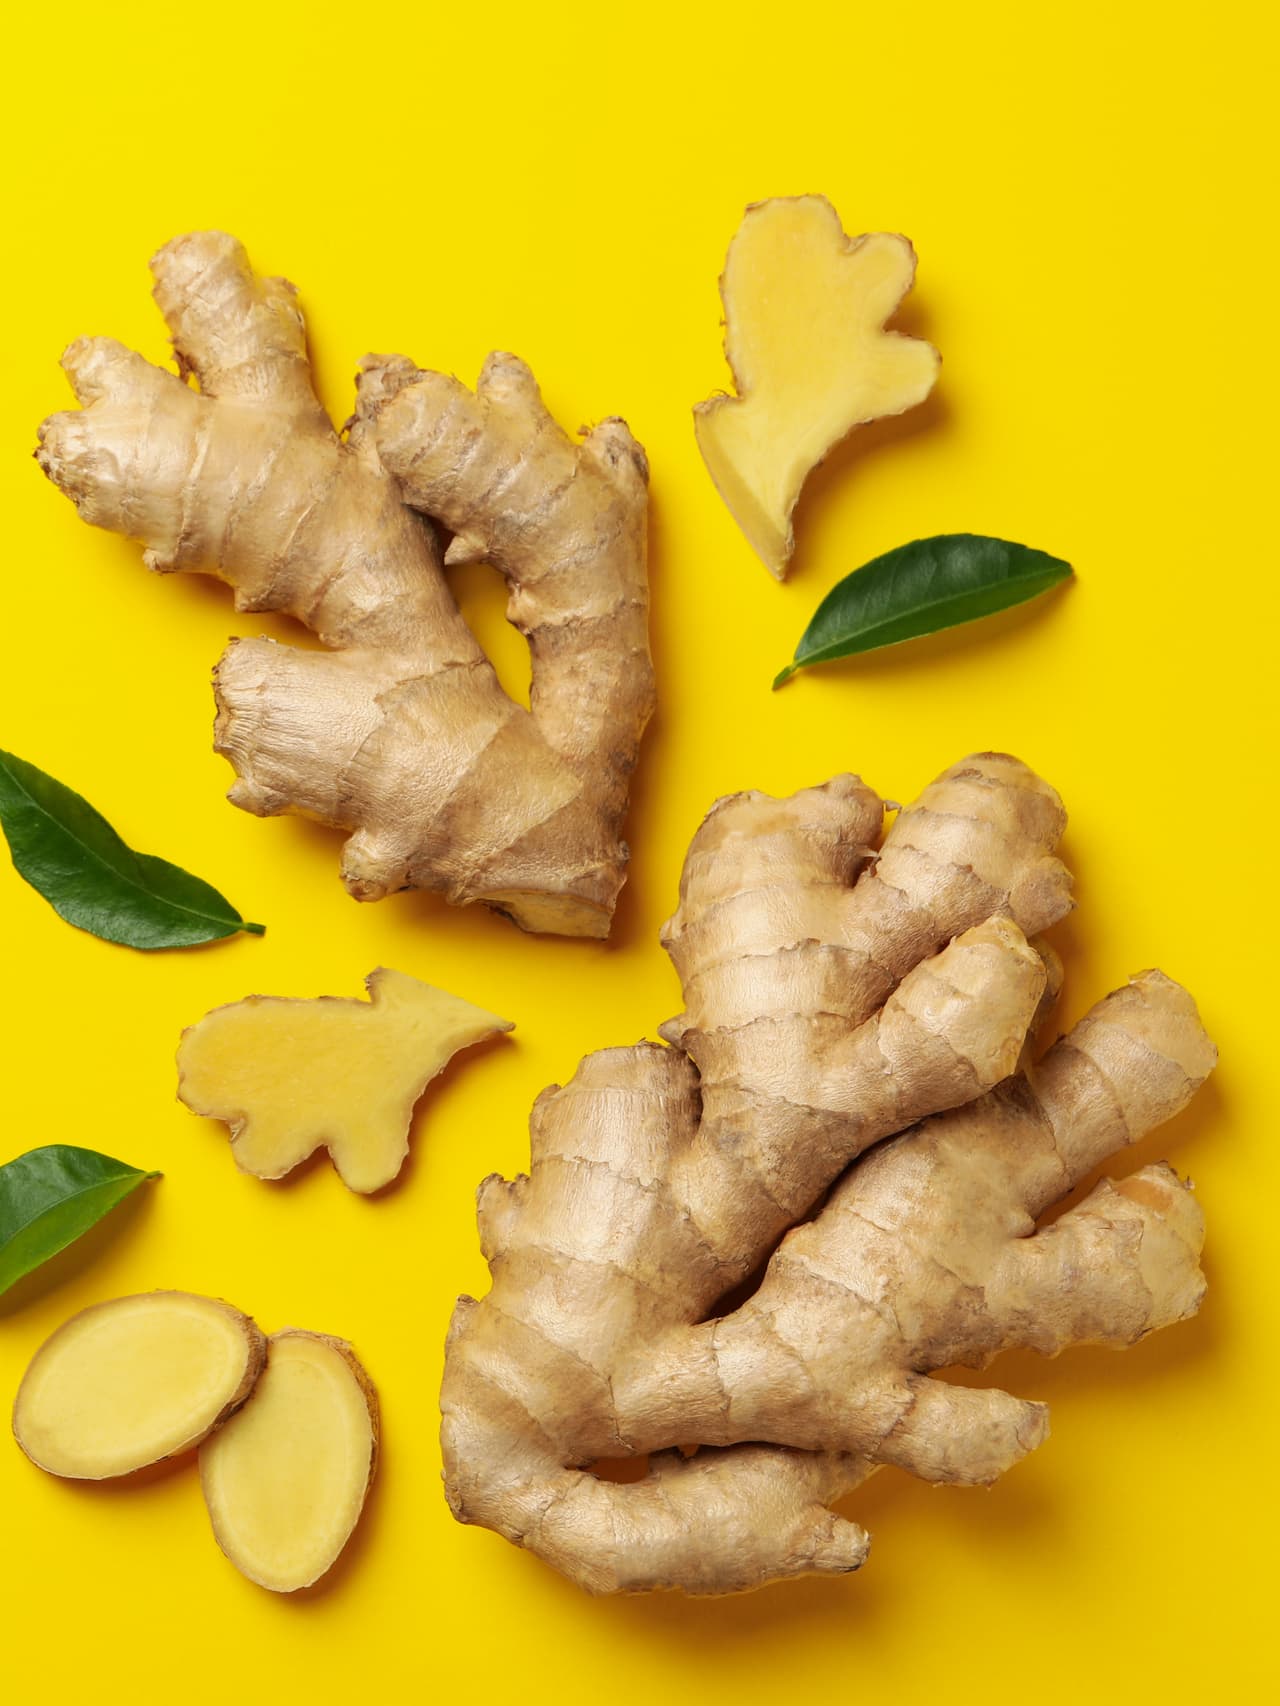 6 Ginger Substitutes That Will Make Your Dish Taste Delicious